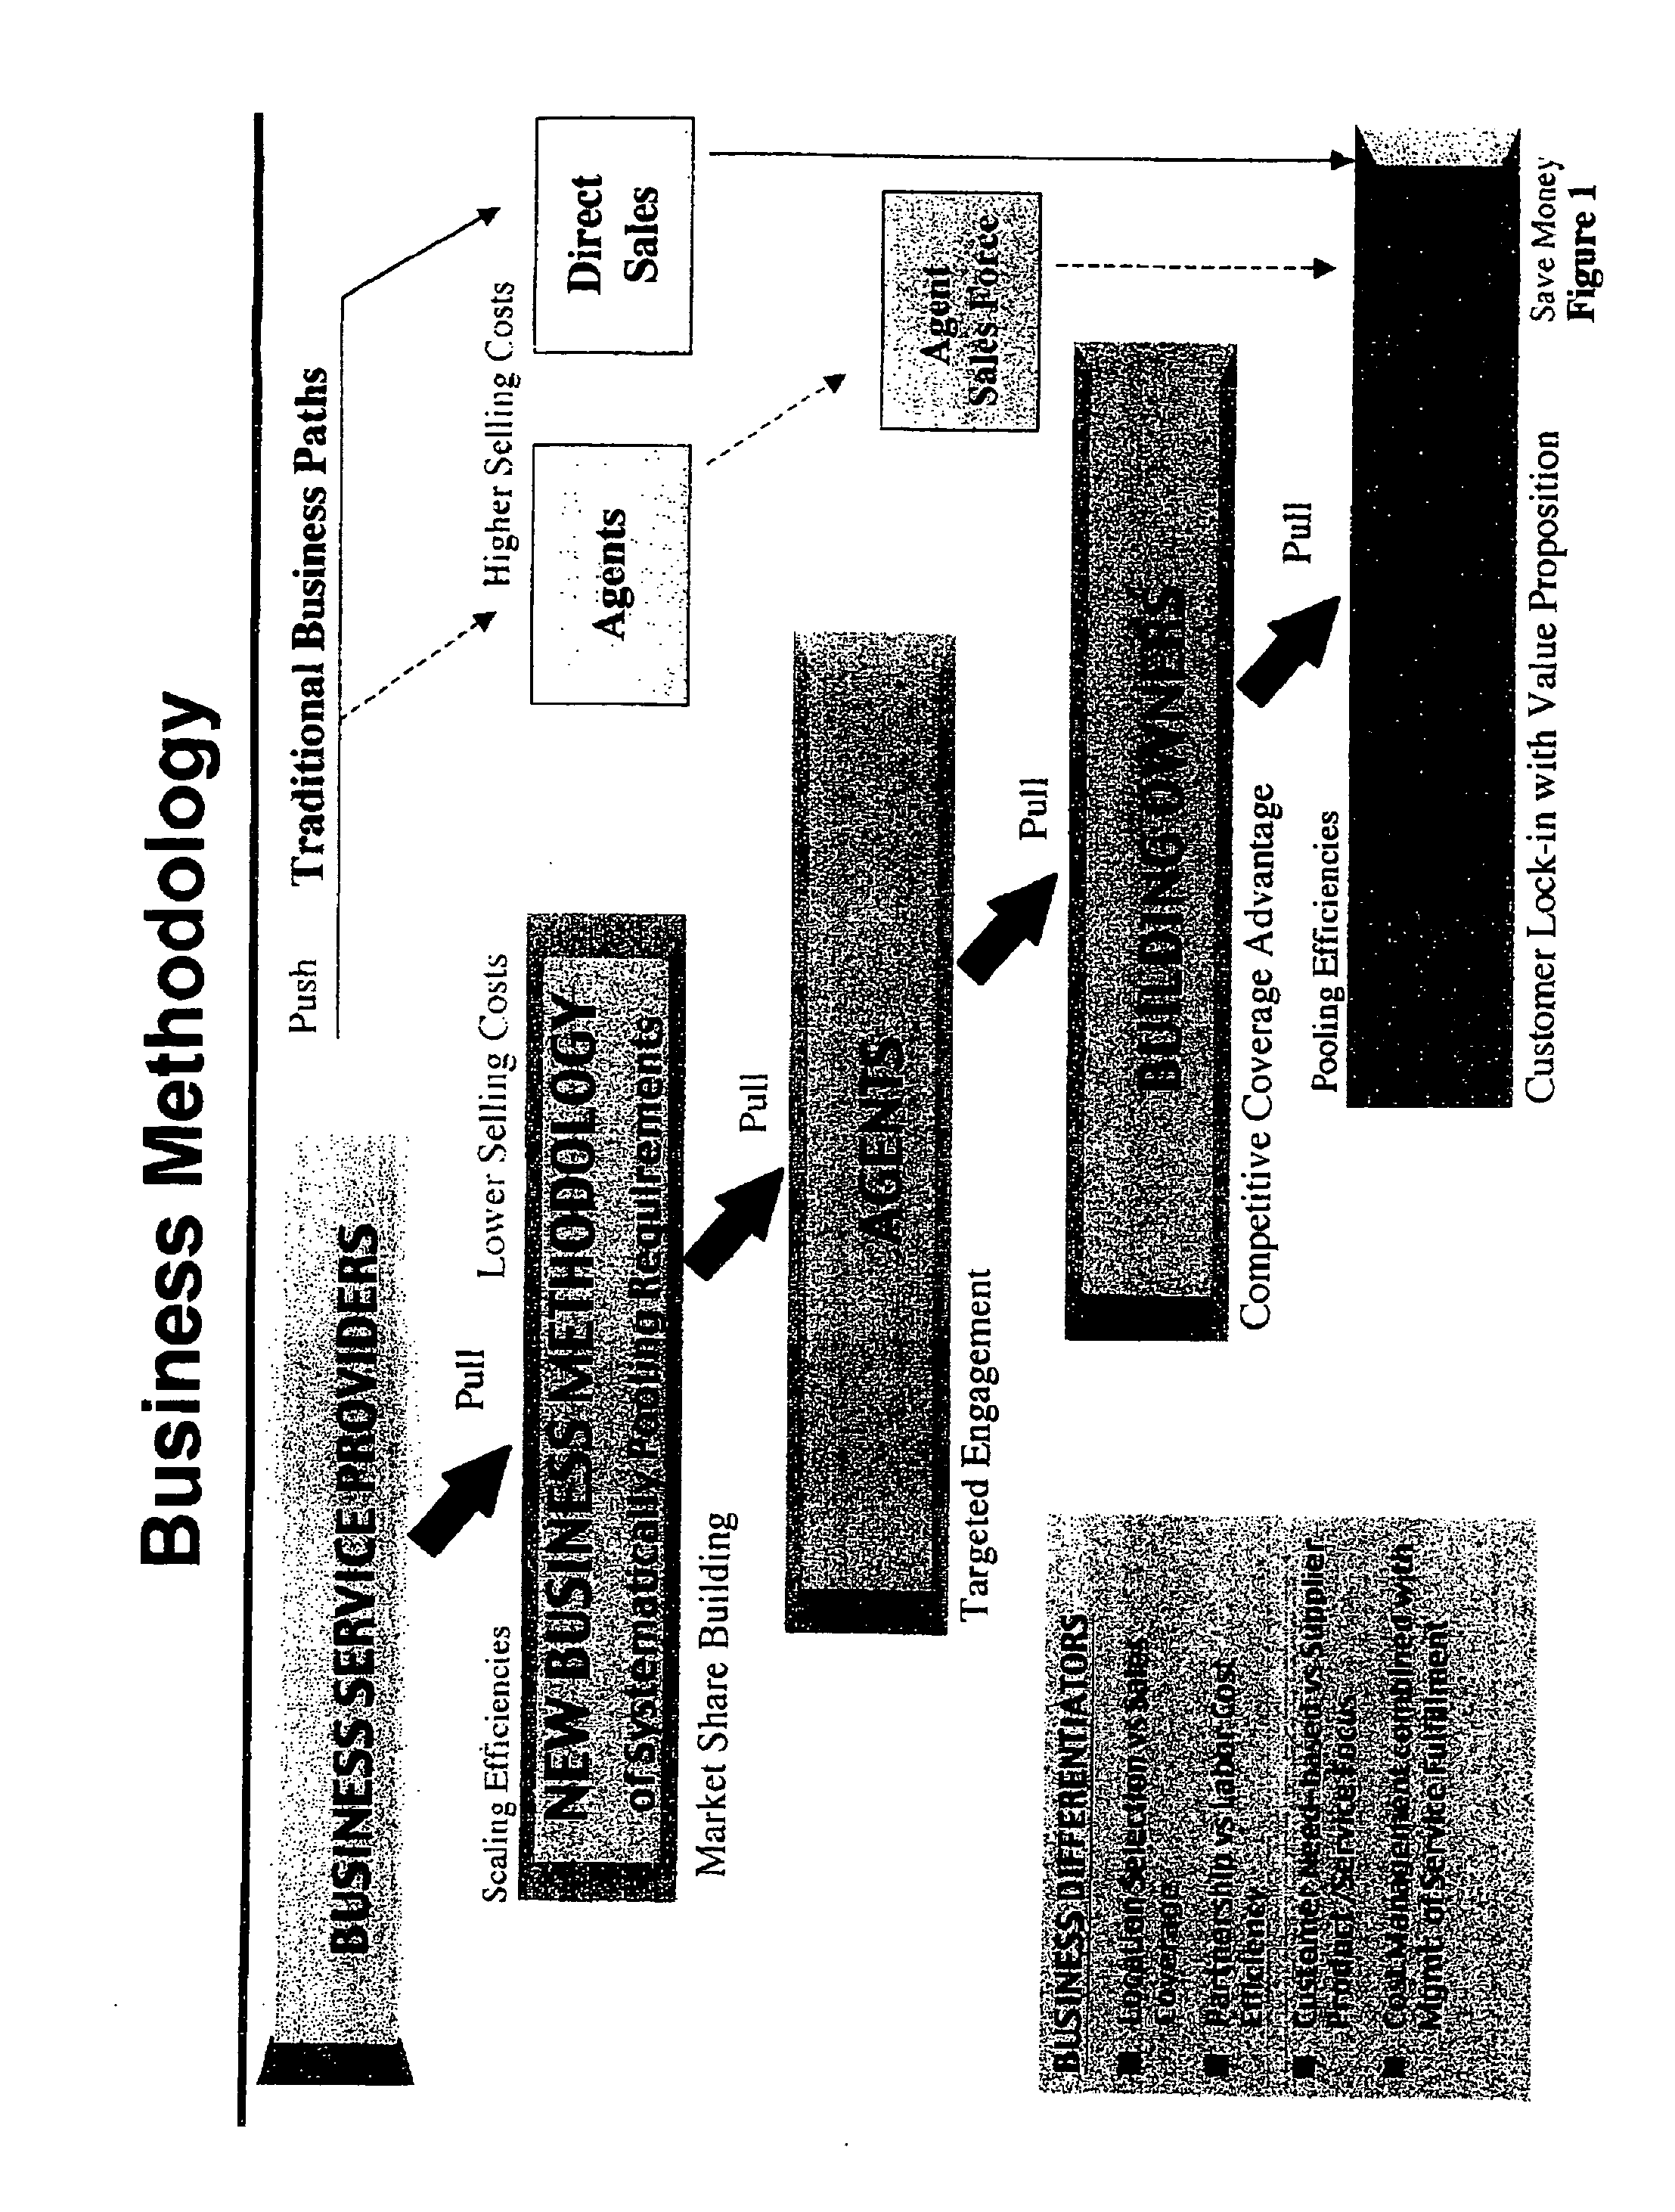 Business method and processing system